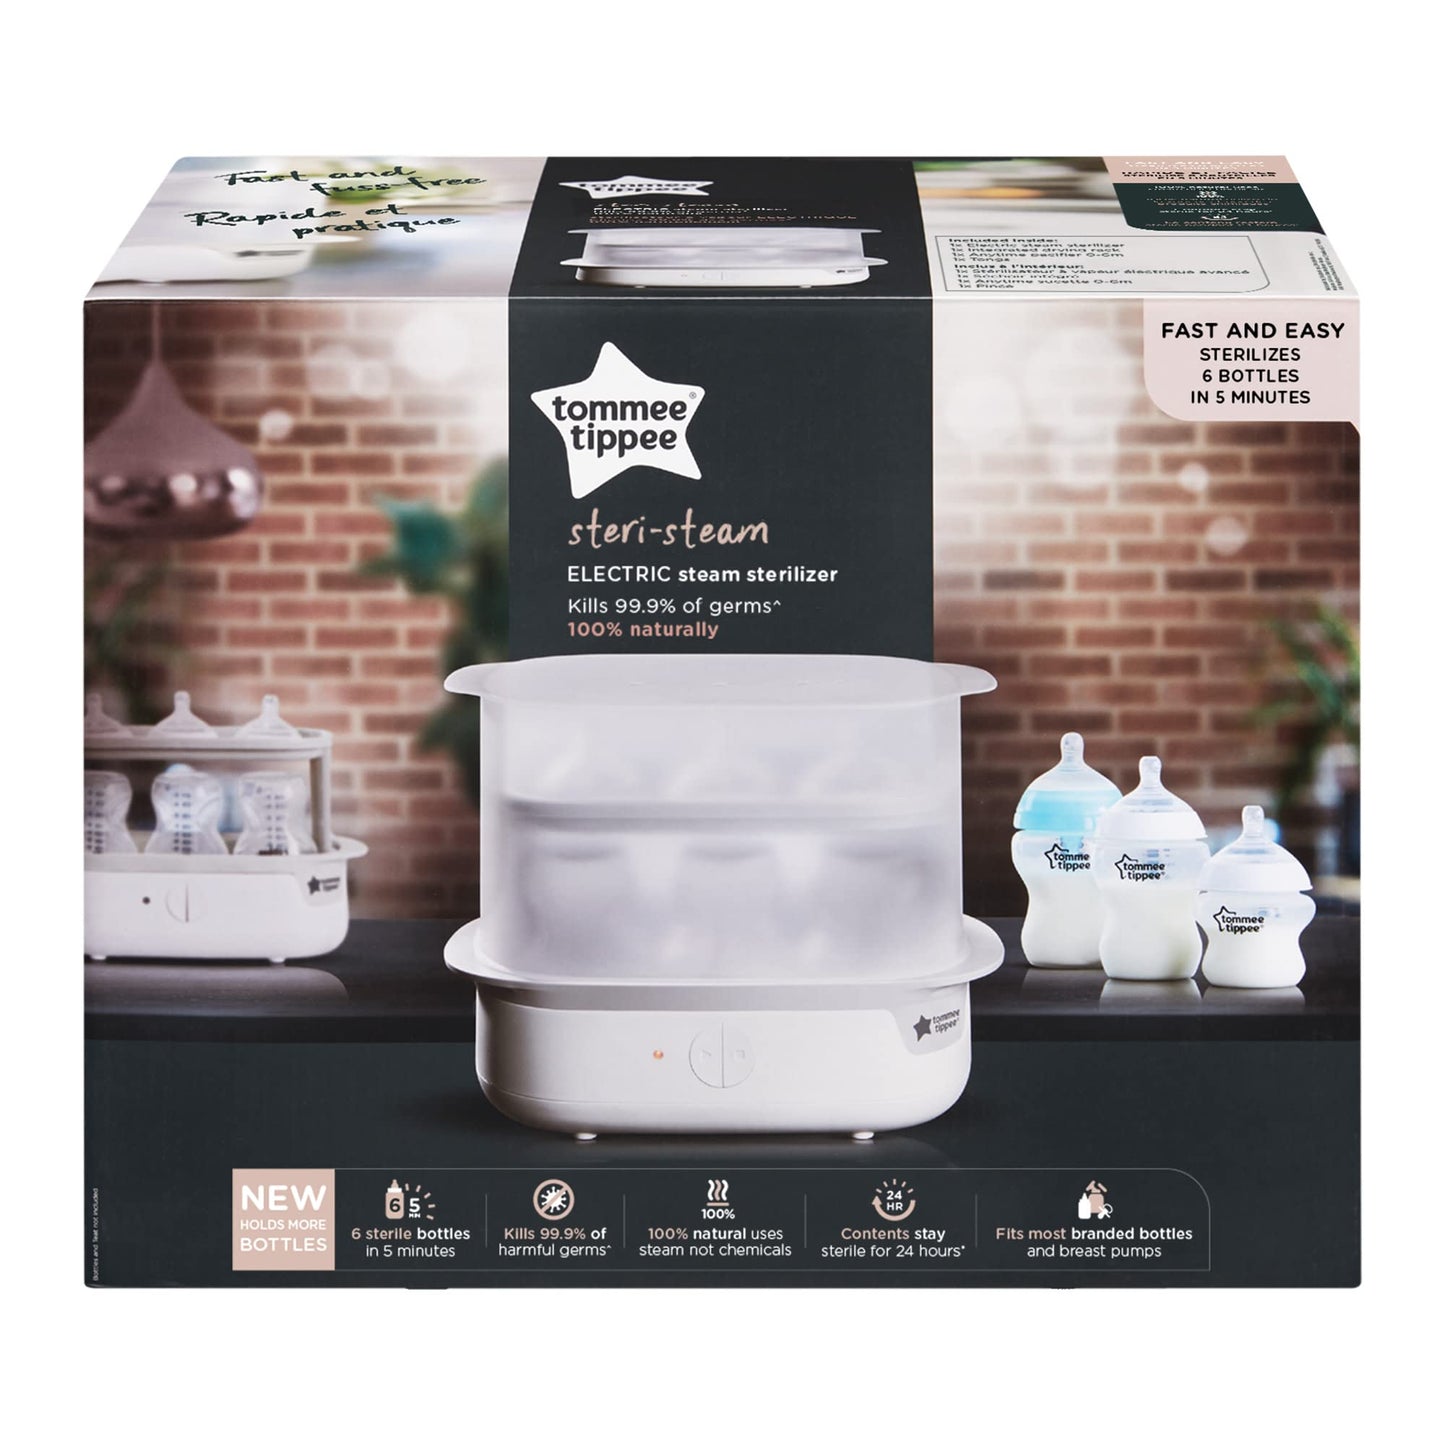 Tommee Tippee Advanced Steam Electric Sterilizer.